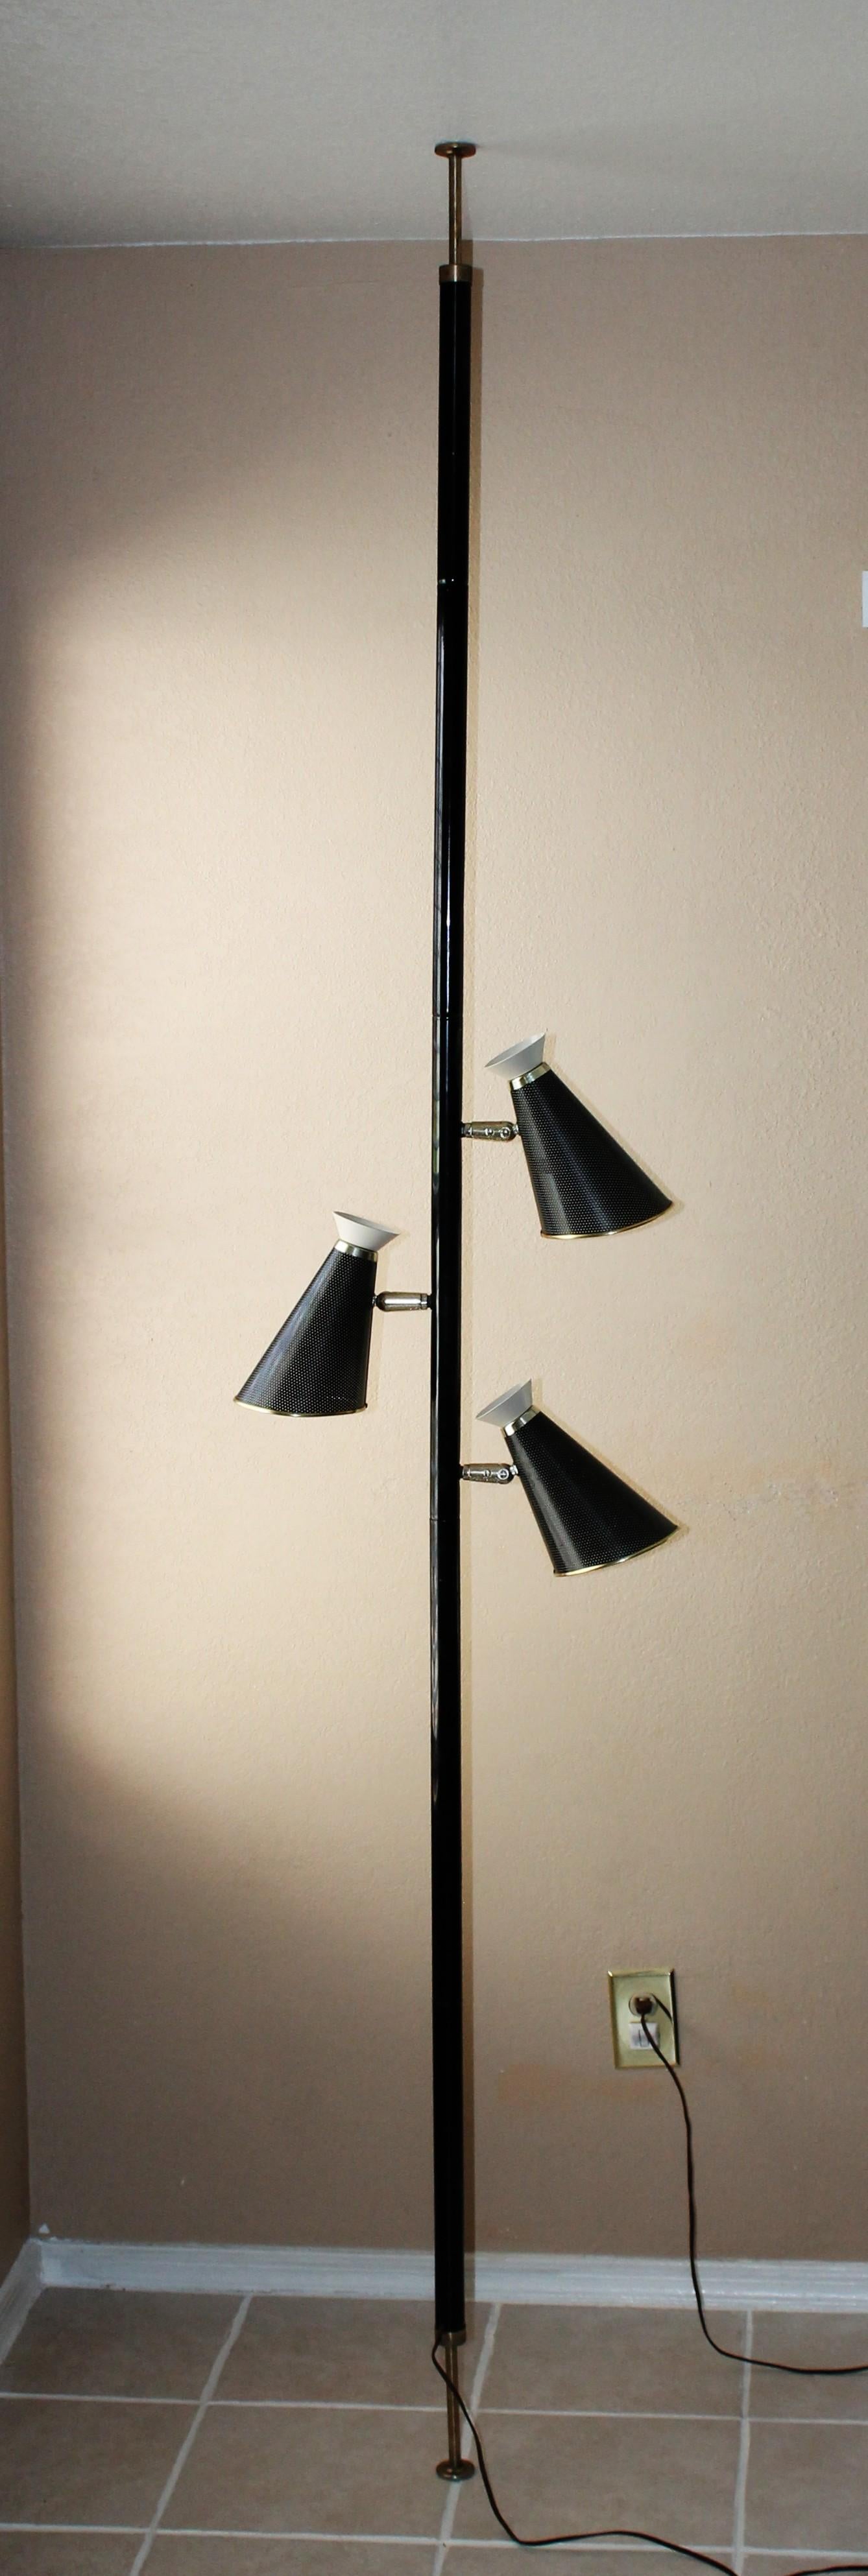 ICONIC!


ATOMIC AGE
MID CENTURY MODERN
TRI-COLOR
TENSION POLE LAMP!


EPIC 